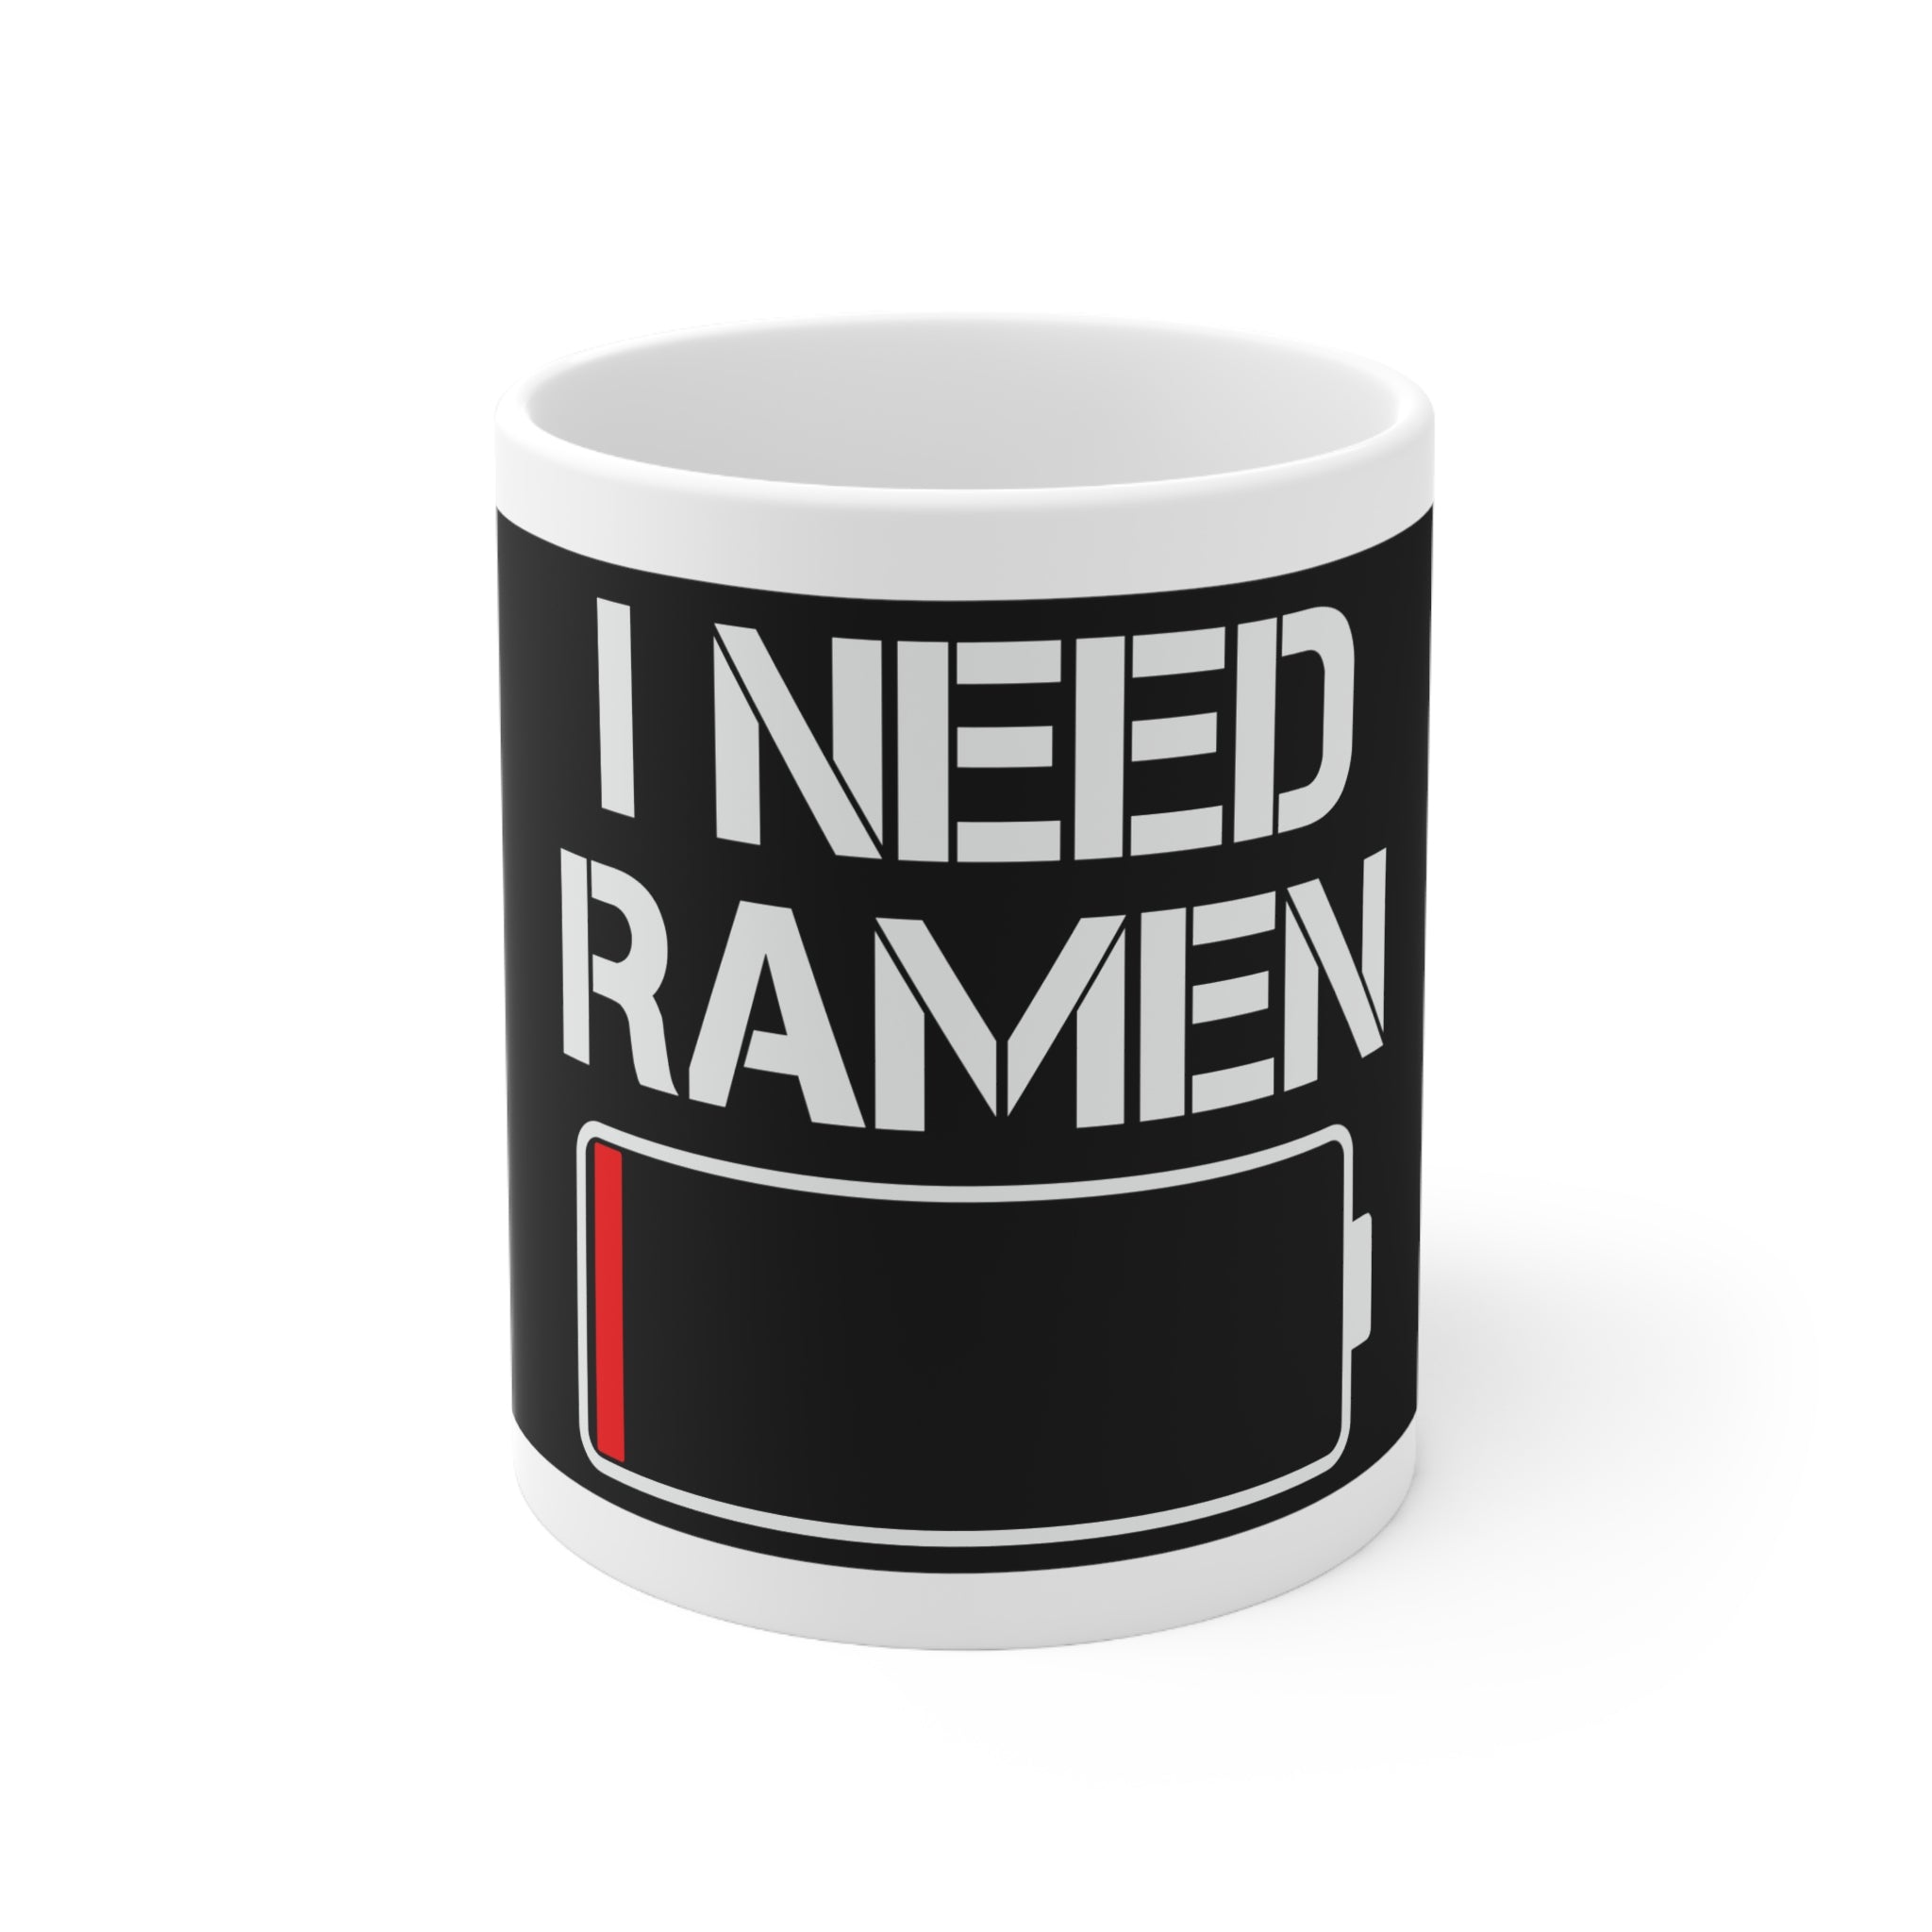 🎨 Whimsical Design for Everyday Fun: Featuring a playful message that says 'I Need Ramen,' this mug is perfect for those who love their noodles as much as their coffee or tea. It's a fun way to express your love for ramen and a unique addition to your mug collection.